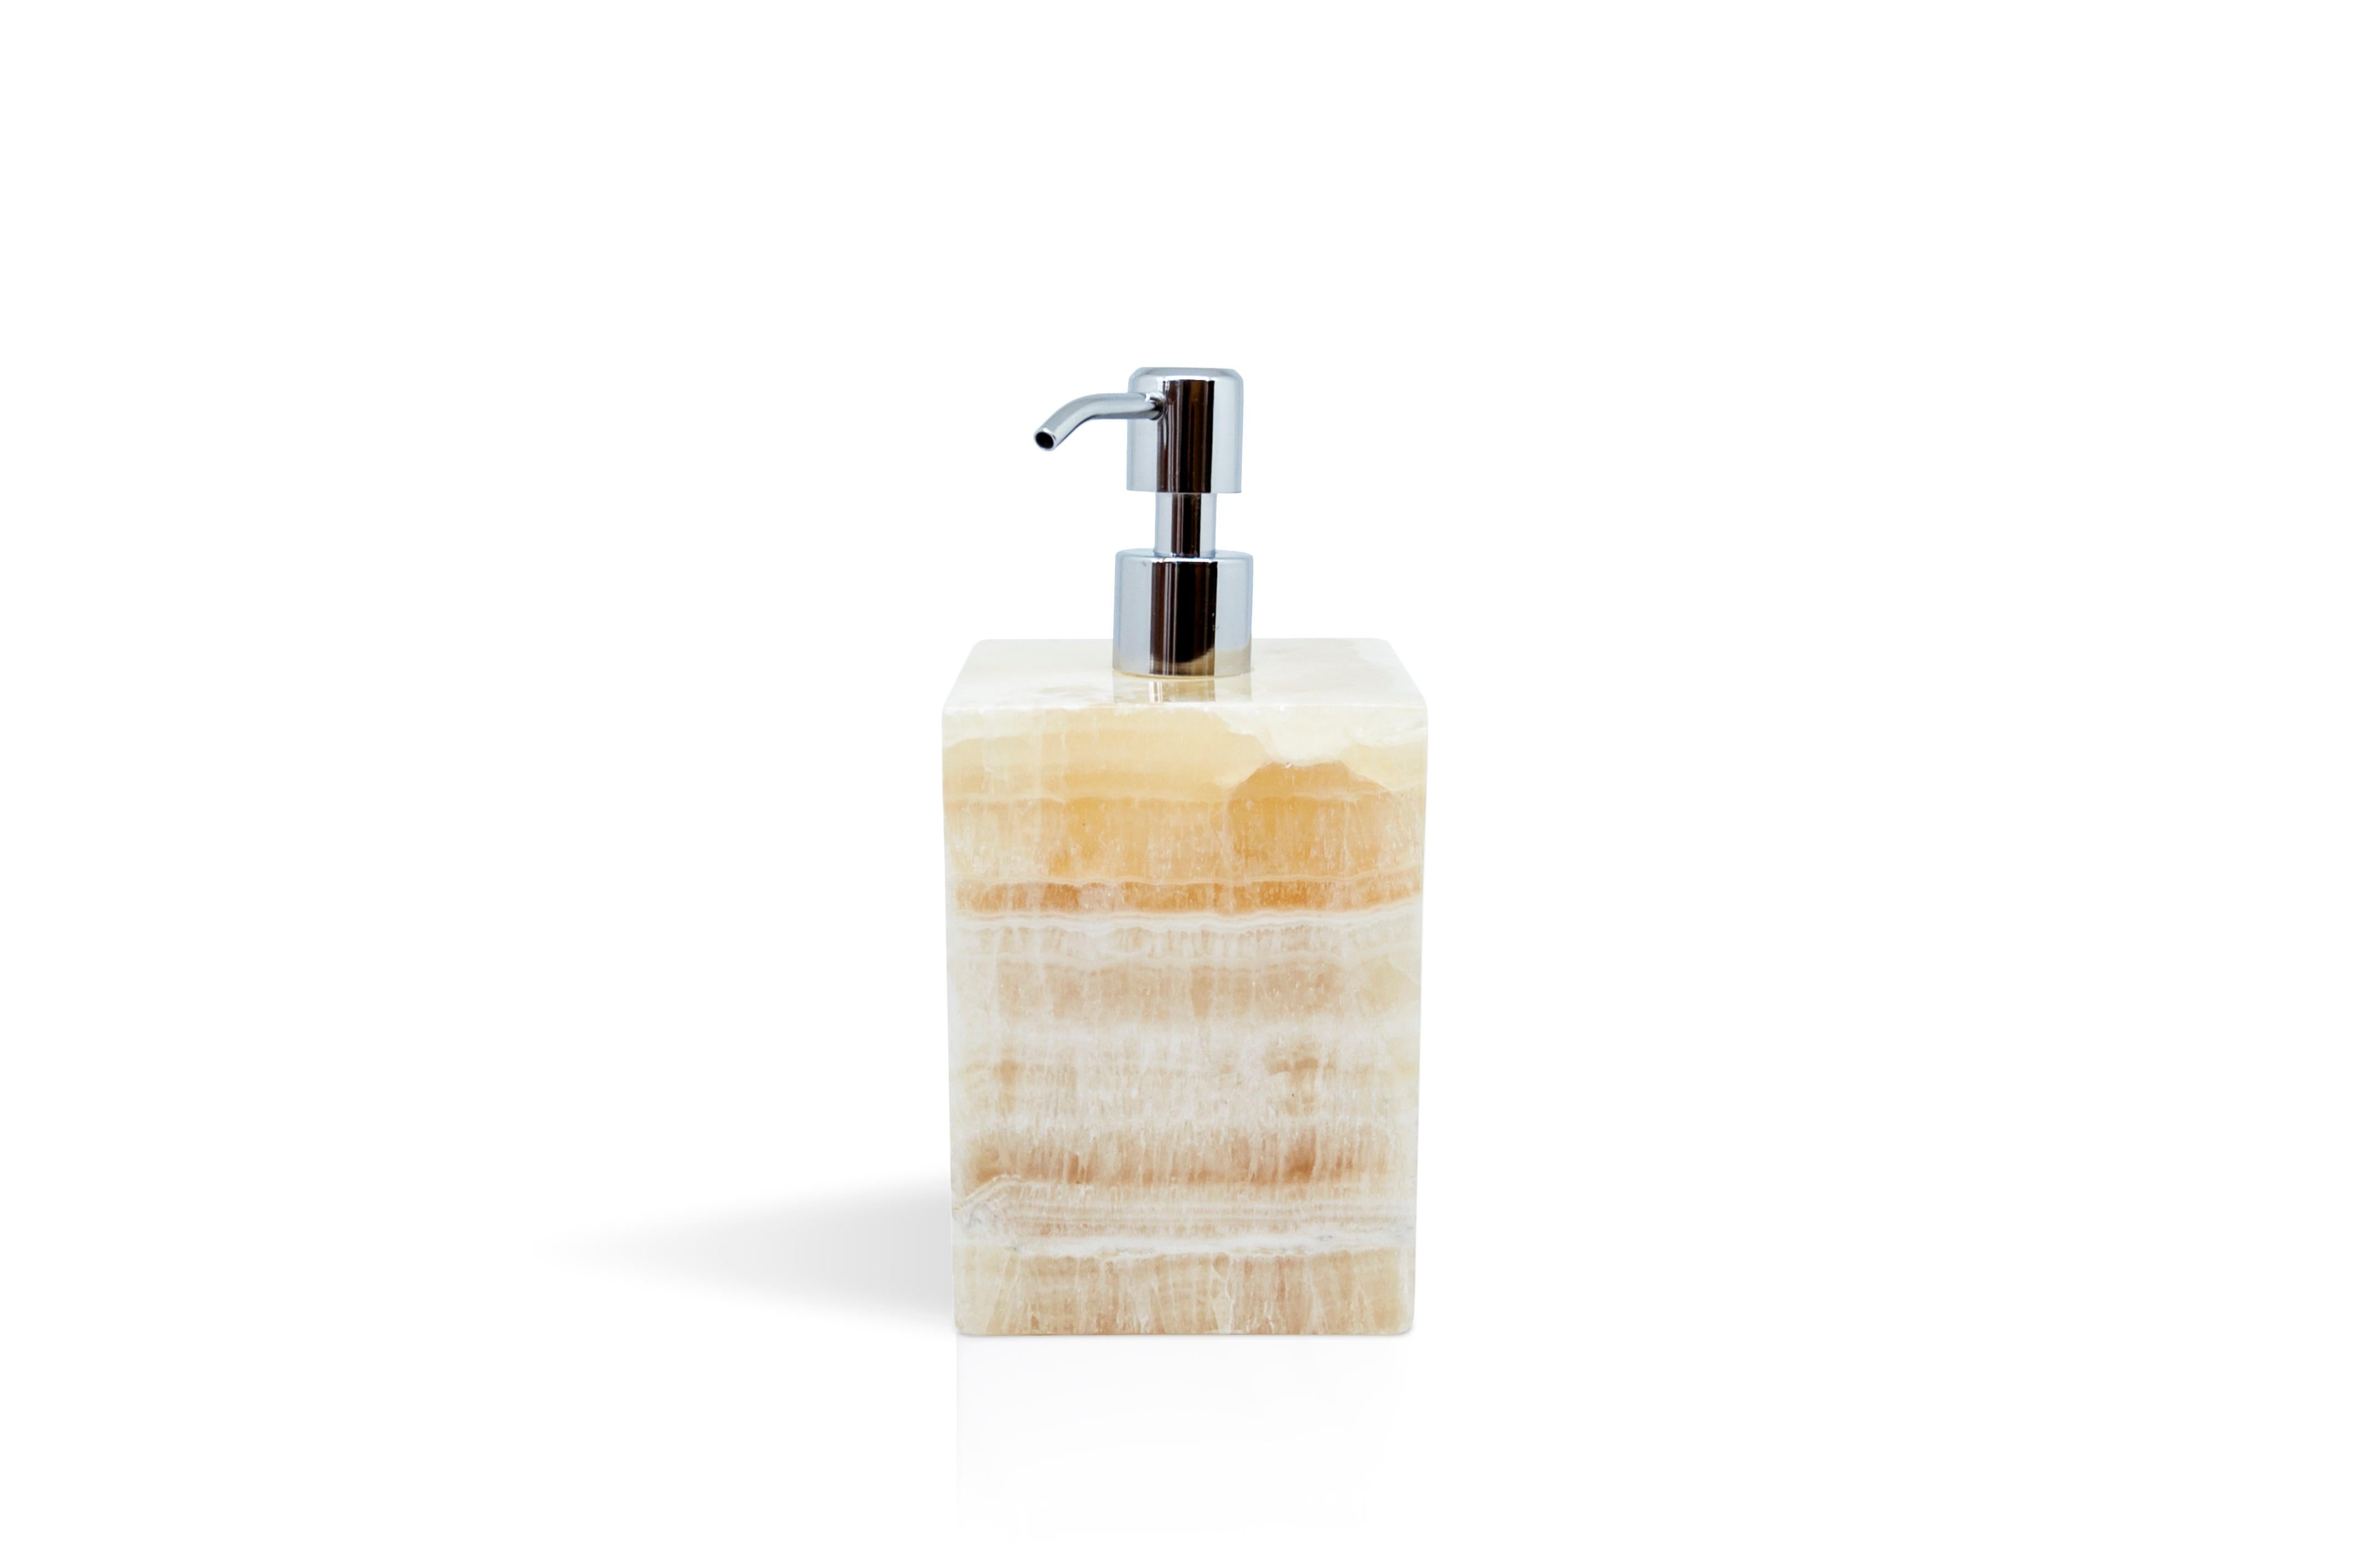 A luxury squared set for the bathroom in a beautiful onyx honey color. The set includes: one soap dispenser (9 x 9 x 19 cm), one toothbrush holder (8.5 x 8.5 x 12 cm), one box holder with lid (9.5 x 9.5 x 9.5 cm).
Each piece is unique (since each